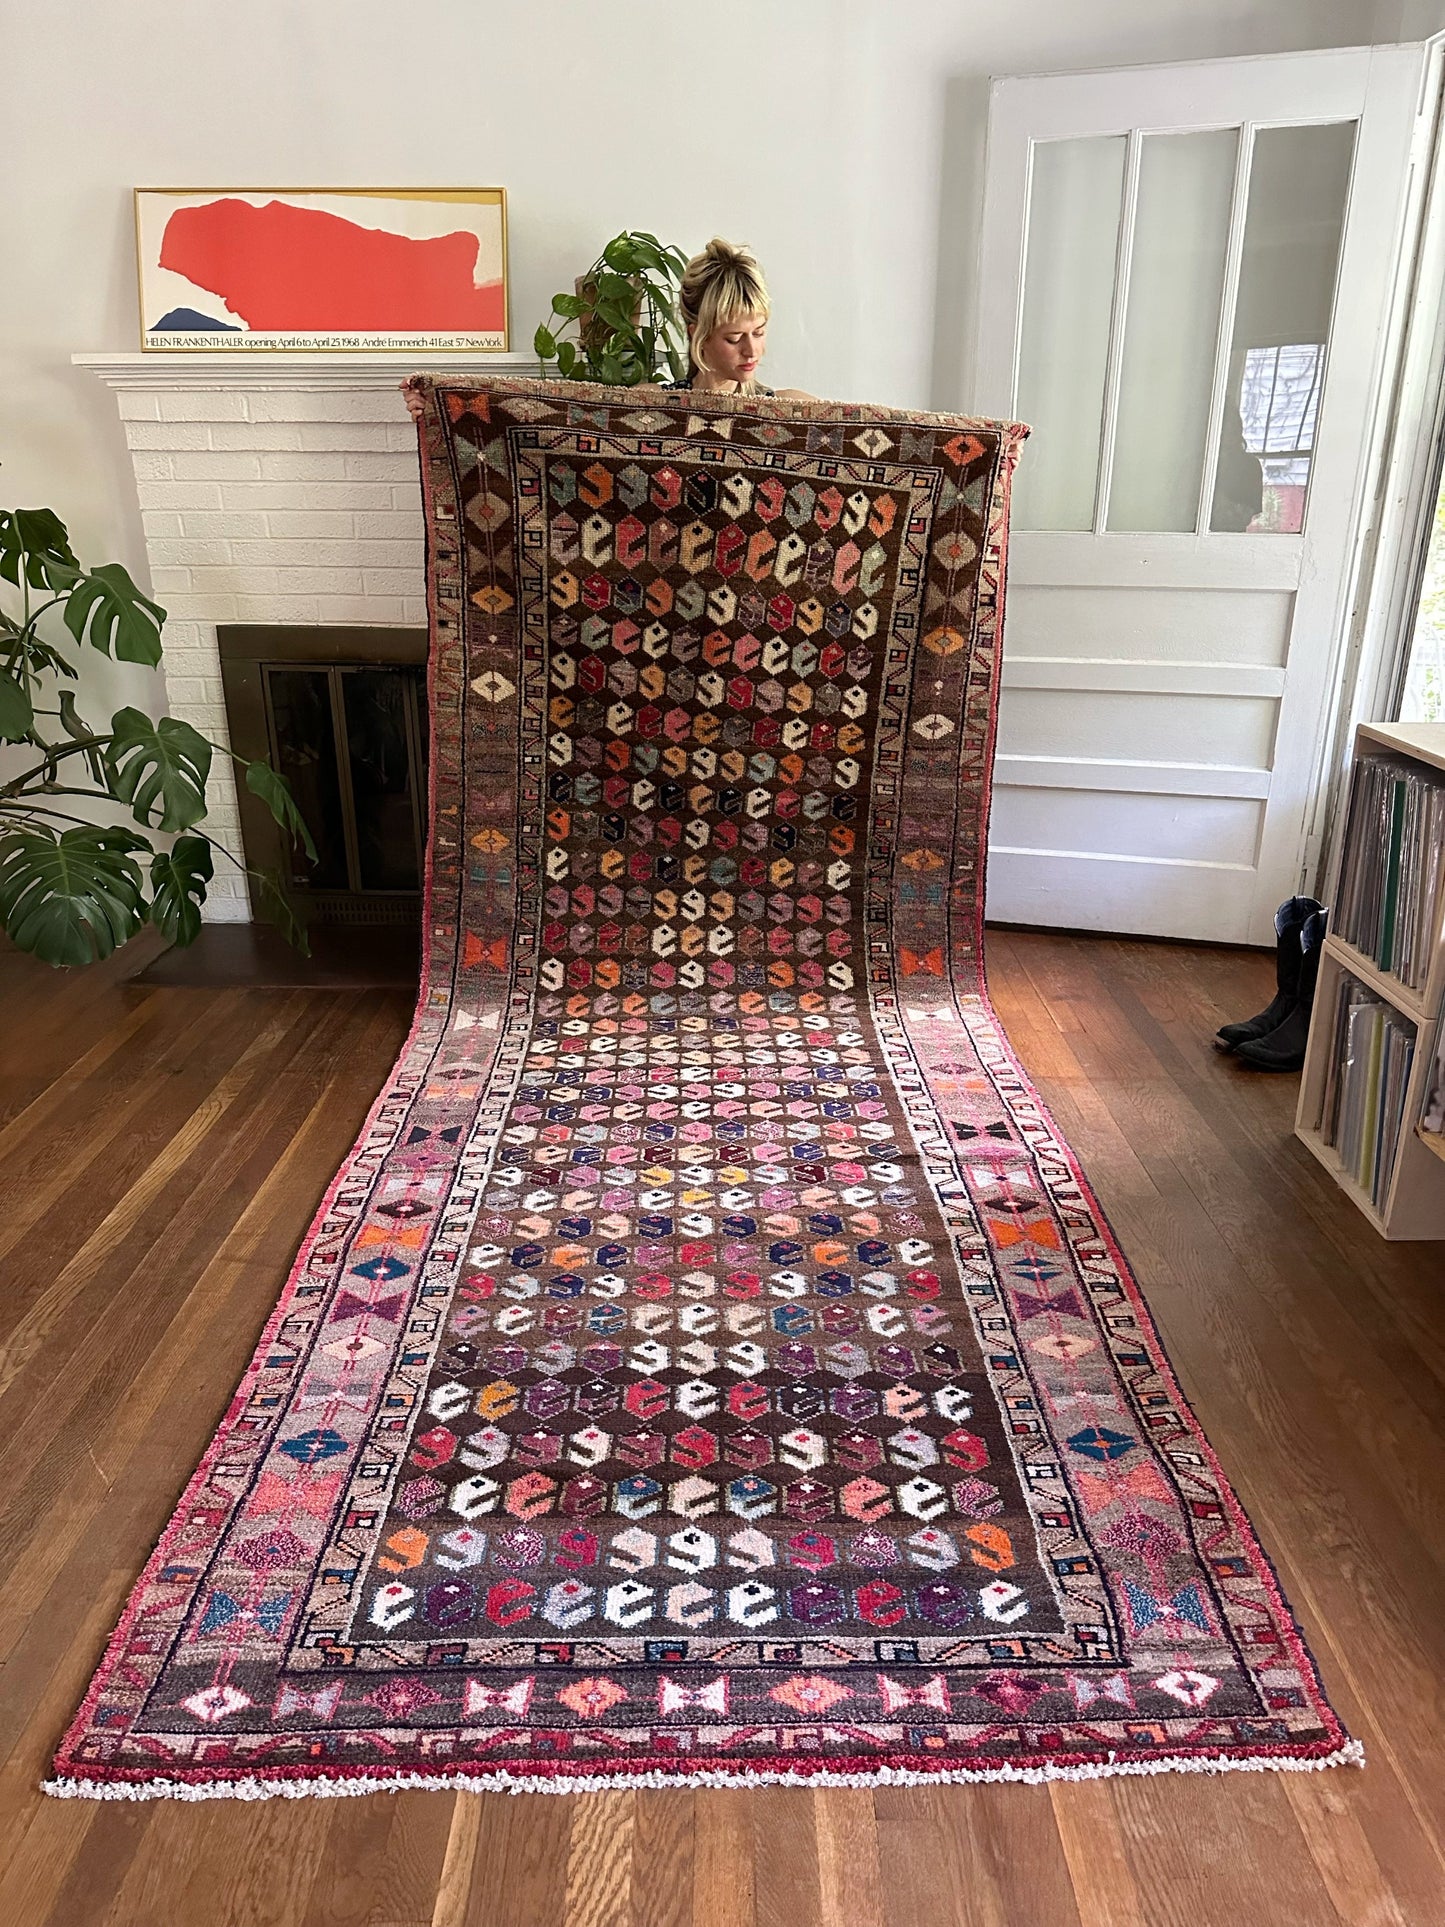 Adorned with endearing motifs, the Dina Persian rug offers a touch of sweetness suitable for a living room, bedroom, or kitchen